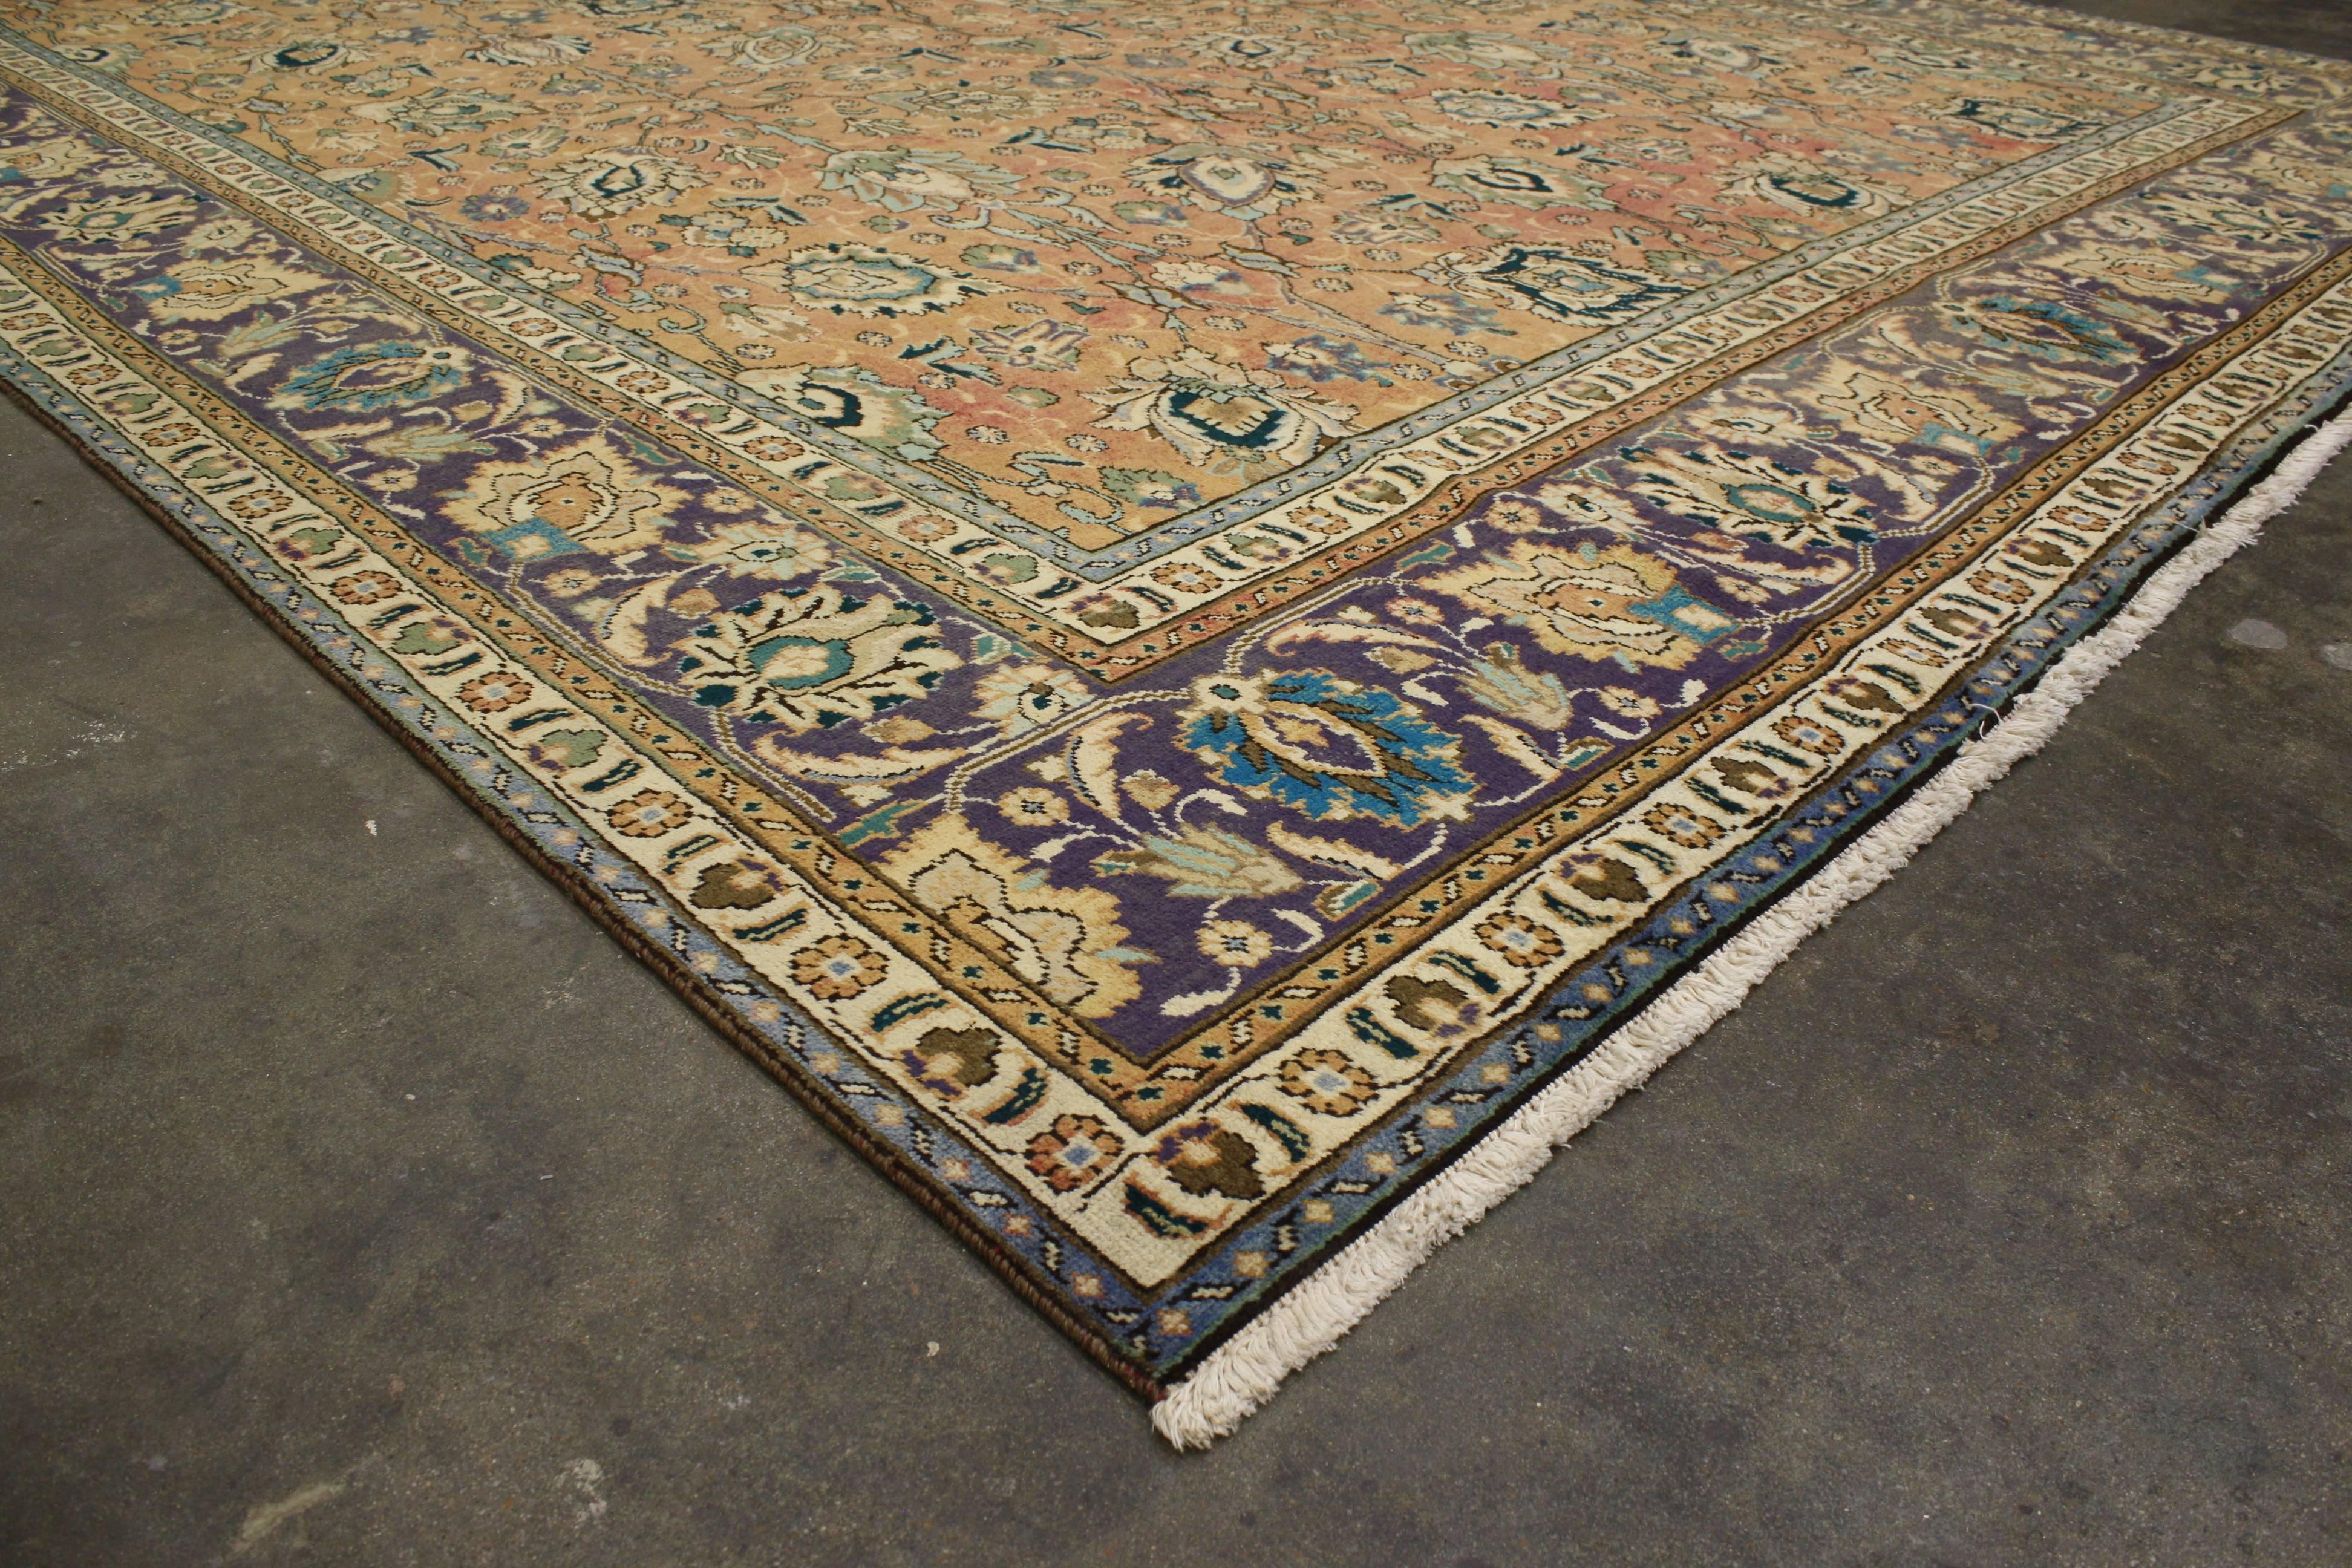 76303, vintage Persian Tabriz with traditional style. This hand-knotted wool vintage Persian Tabriz rug features an allover pattern surrounded by a classic border creating a well-balanced and timeless design. This vintage Persian Tabriz rug brings a